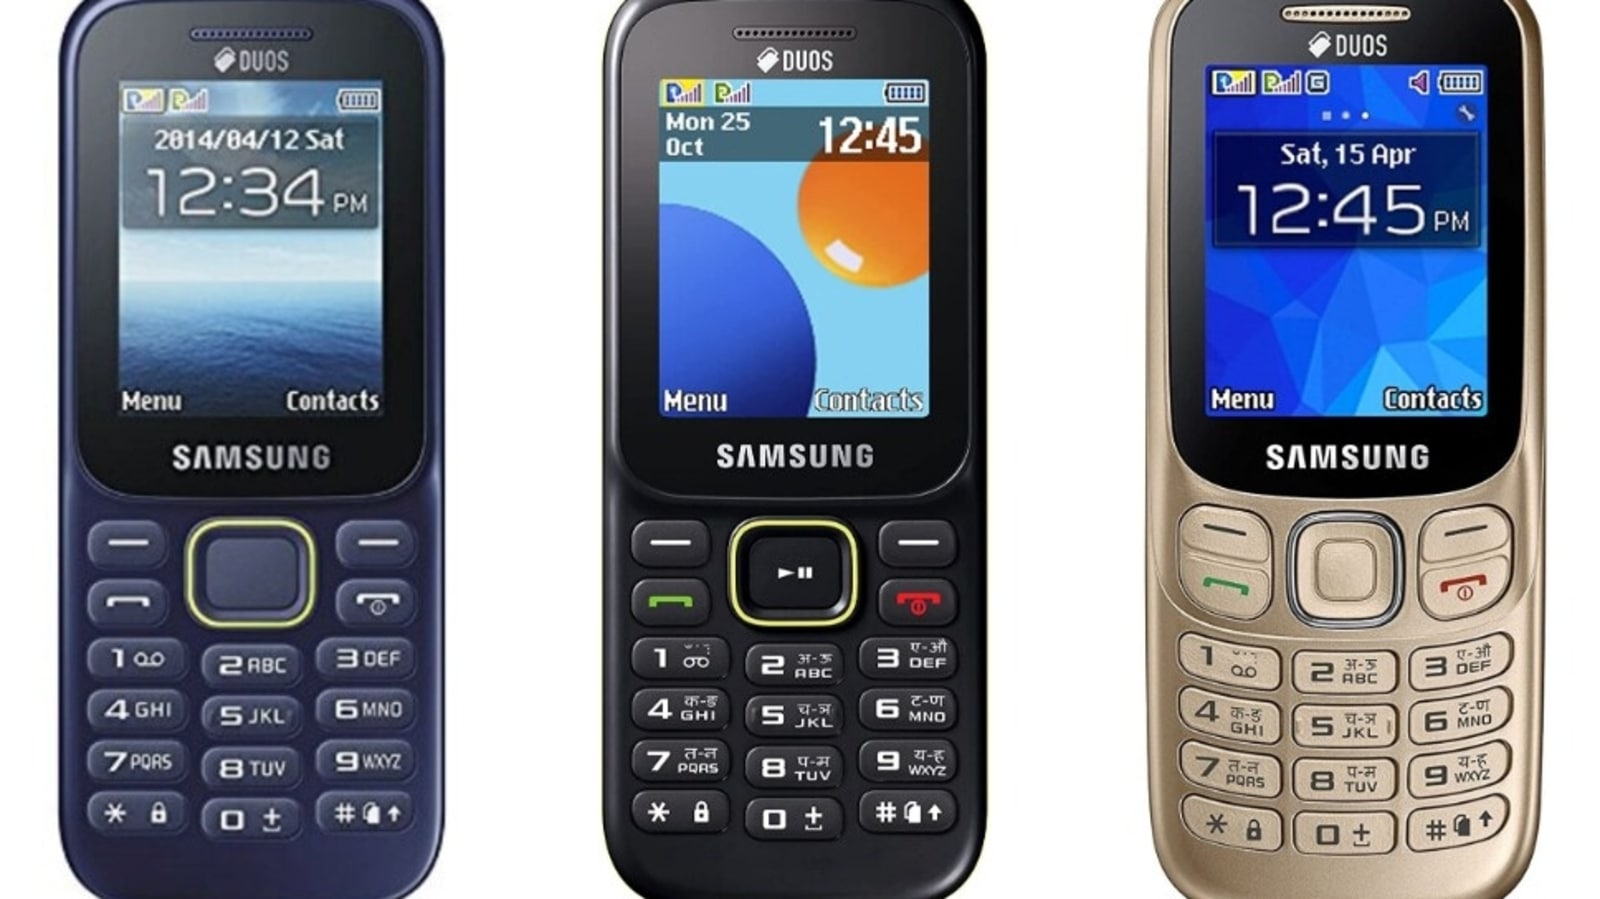 Most popular Samsung 2G mobile phones in the market